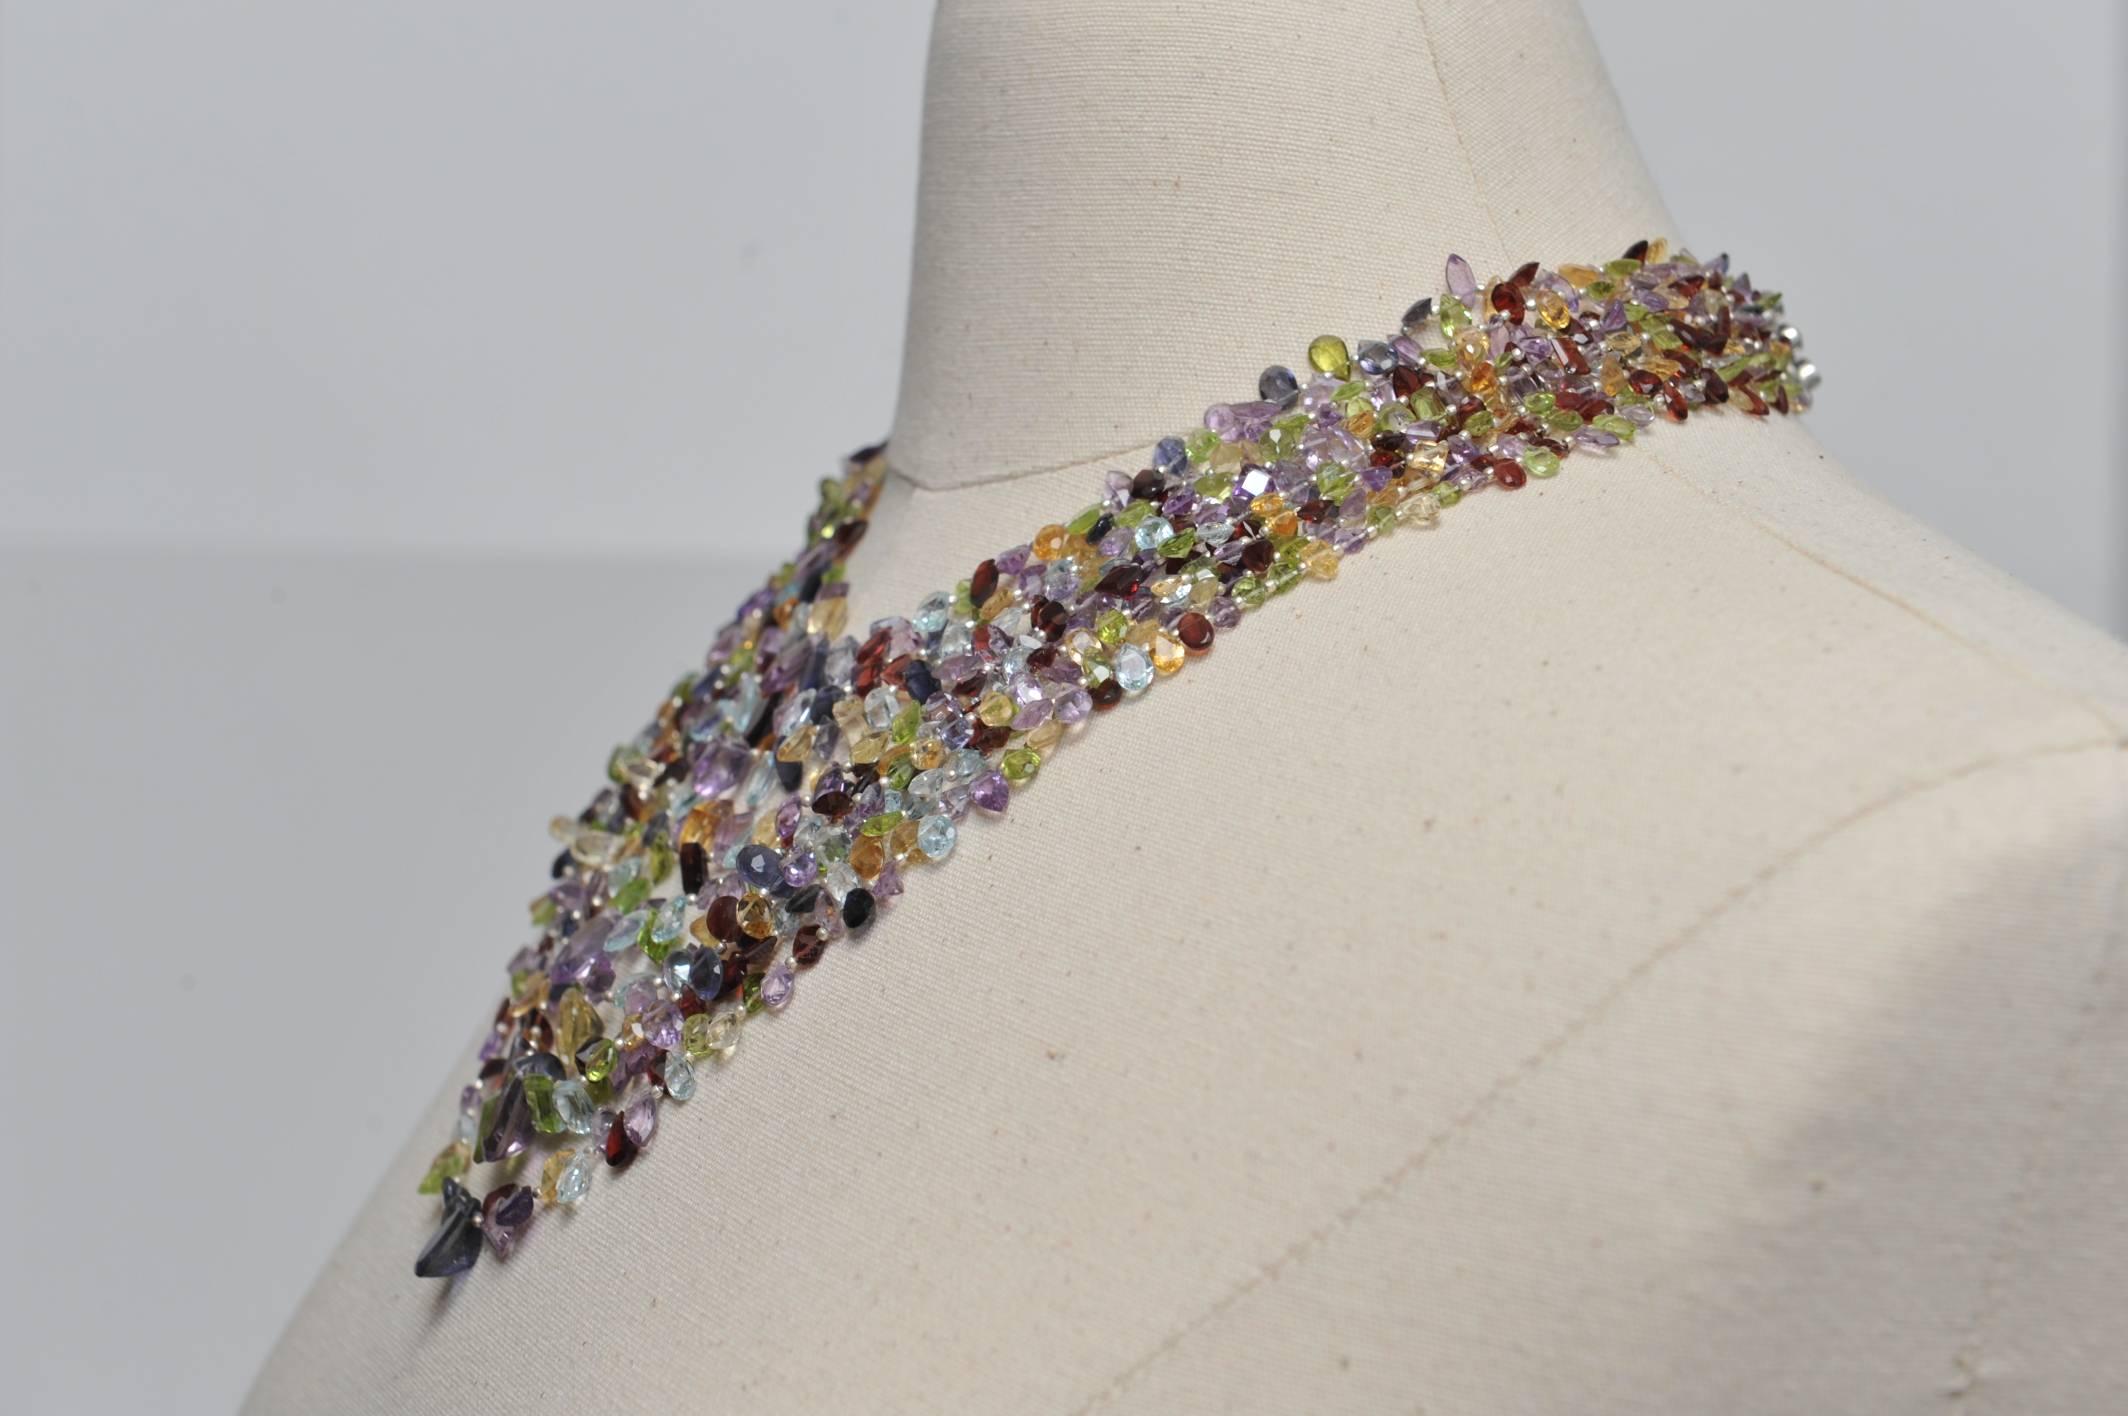 This exceptional necklace consists of nine strands of faceted semi-precious stones of various cuts, shapes and sizes.  The stones are aquamarine, citrine, peridot, amethyst, garnet, and iolite.  There are emerald cuts, marquise, pear, ovals and